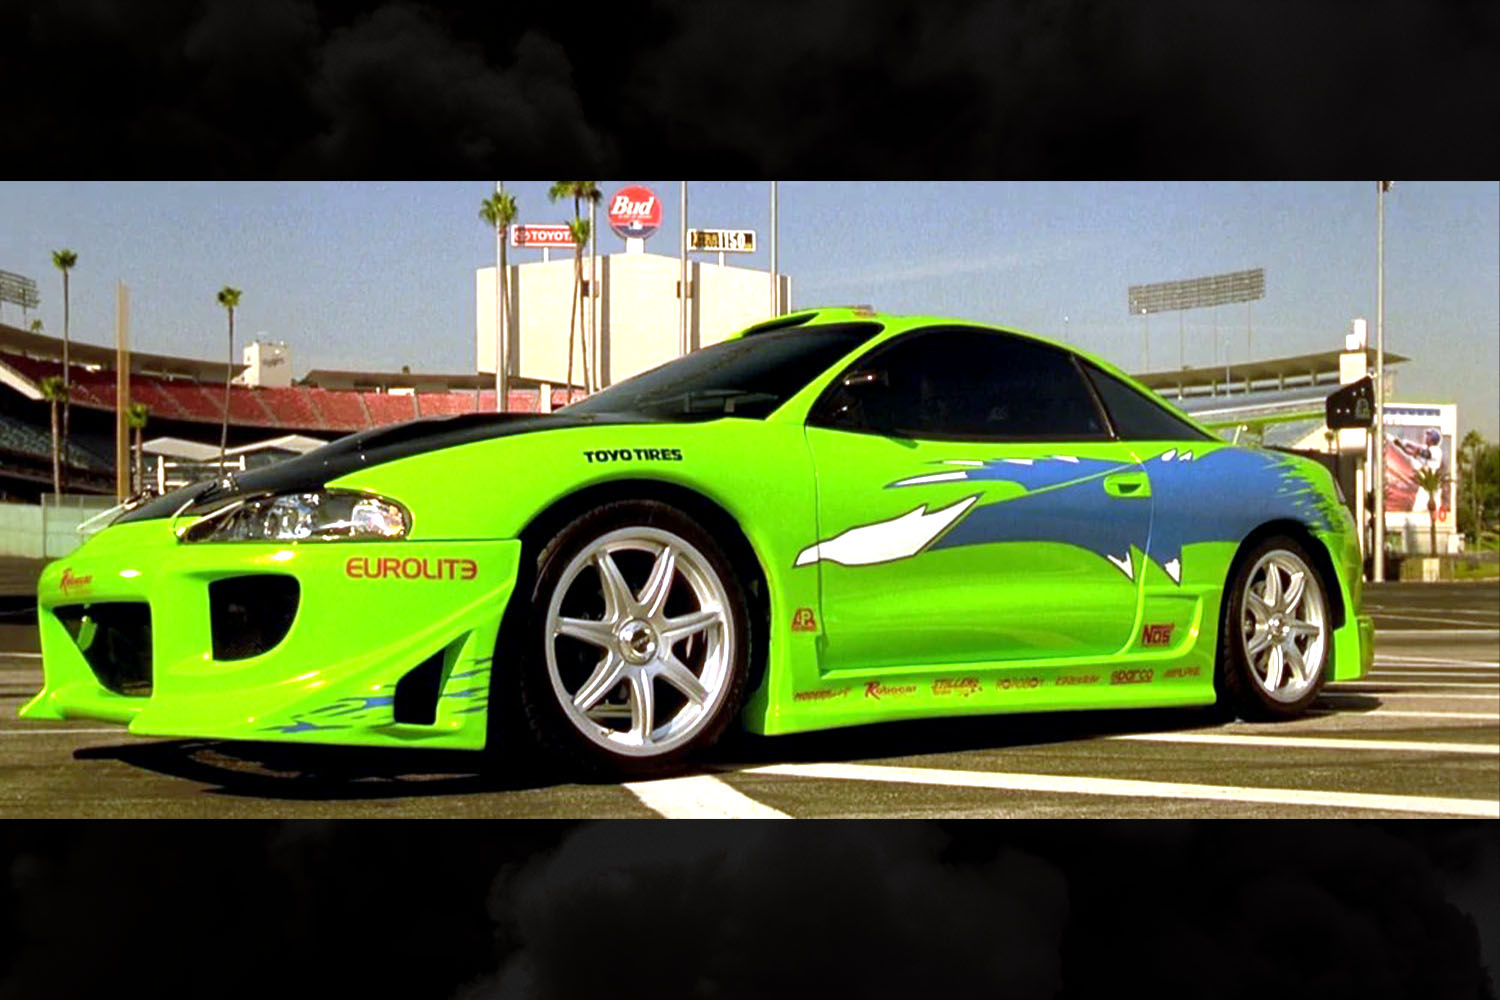 The green 1995 Mitsubishi Eclipse driven by Brian O’Conner (Paul Walker) in The Fast and the Furious, one of the most recognizable cars from the franchise